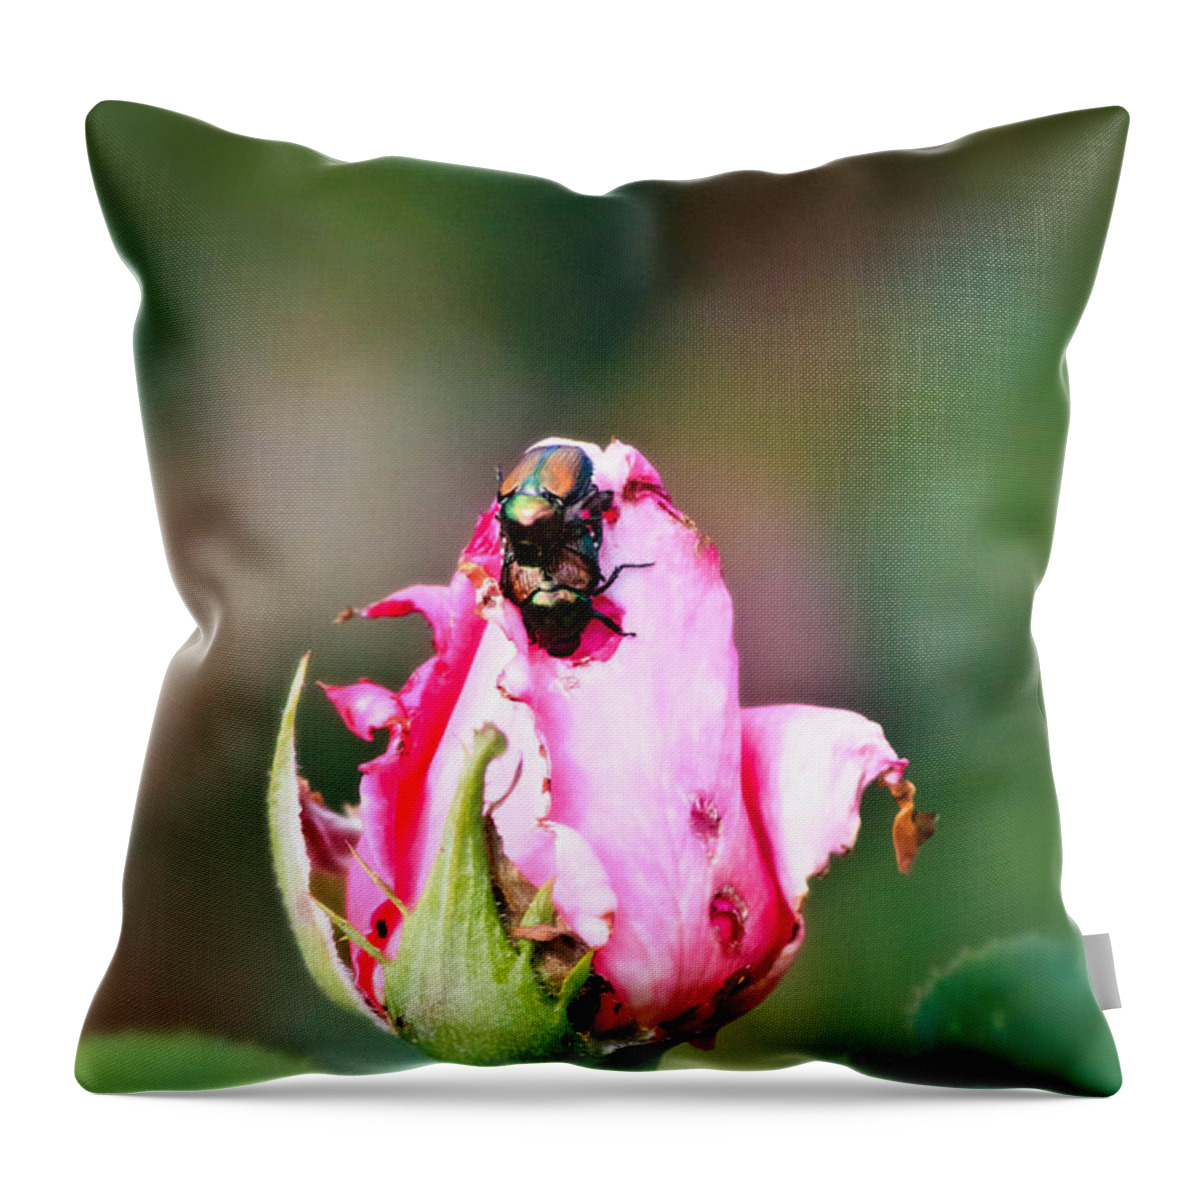 Love Bugs Throw Pillow featuring the photograph Love Bugs by Ms Judi